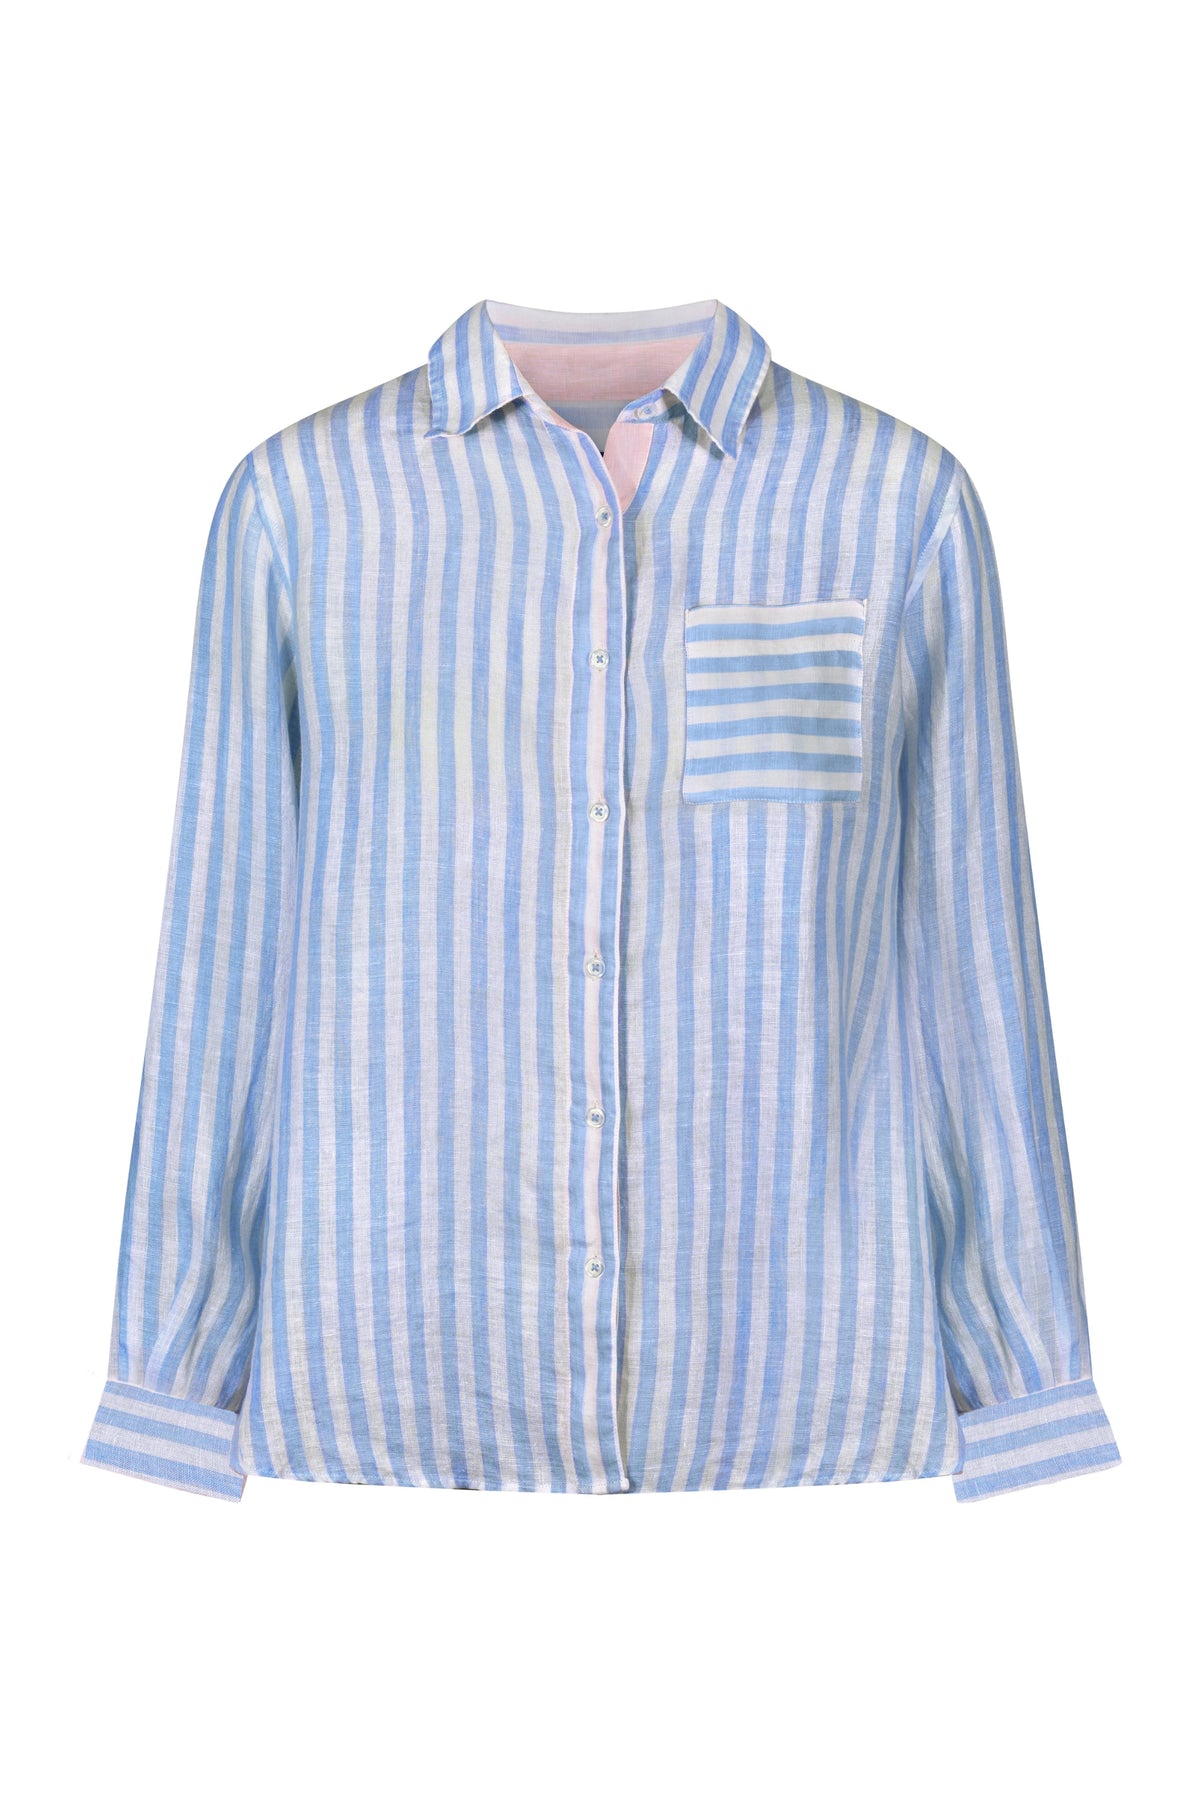 Exmoor Linen Shirt - Blue - Whale Of A Time Clothing